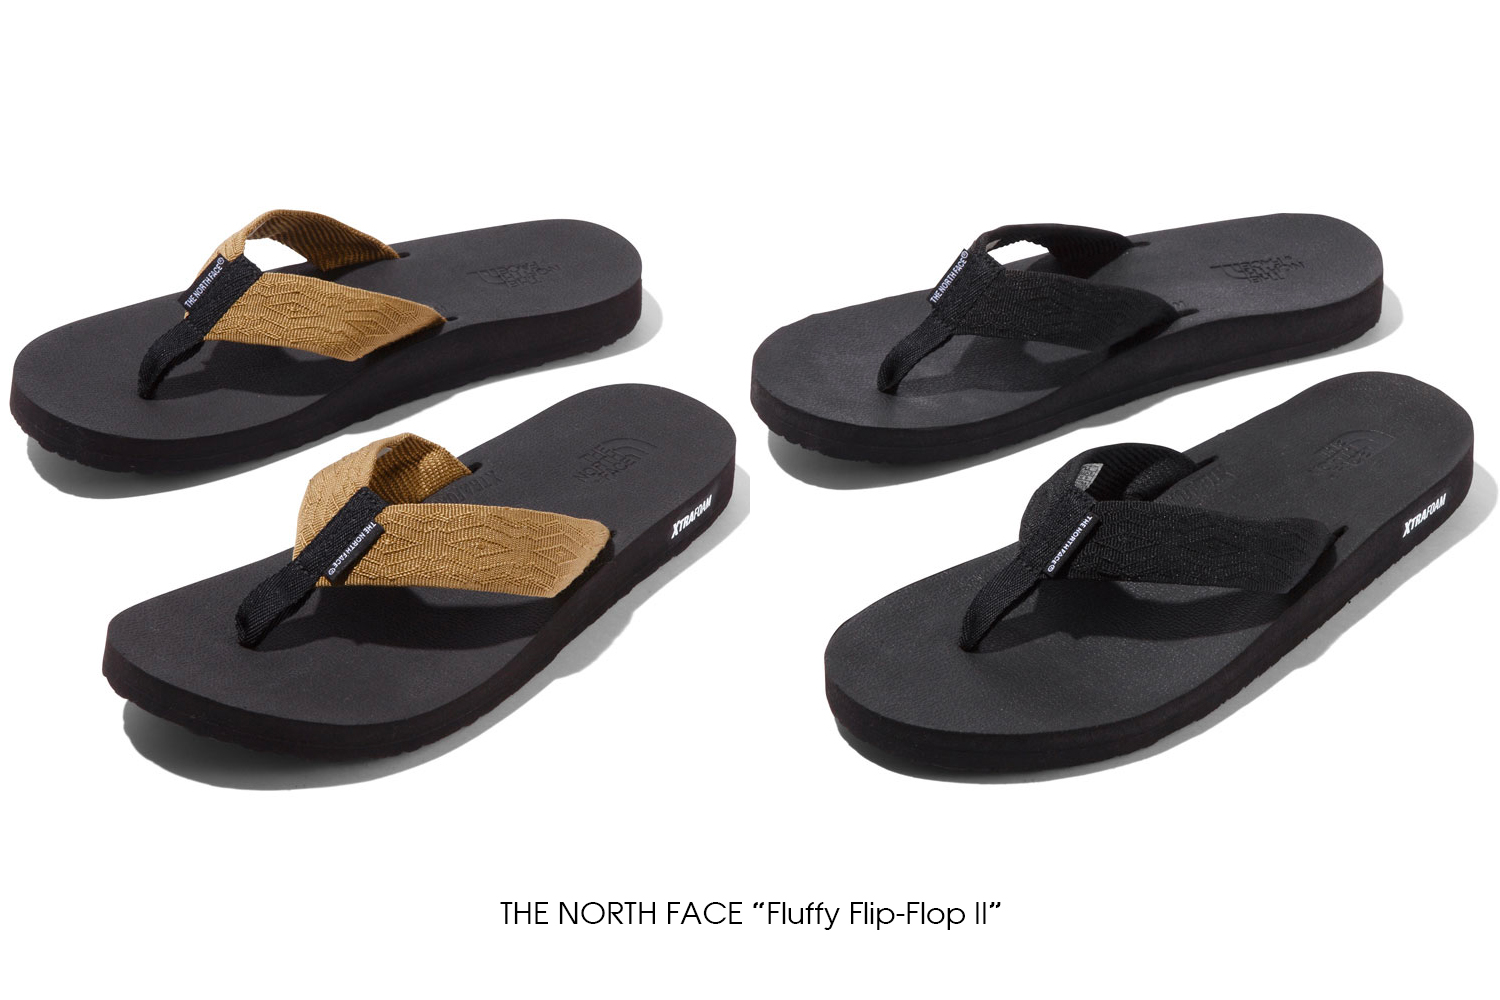 THE NORTH FACE "Fluffy Flip-Flop II"